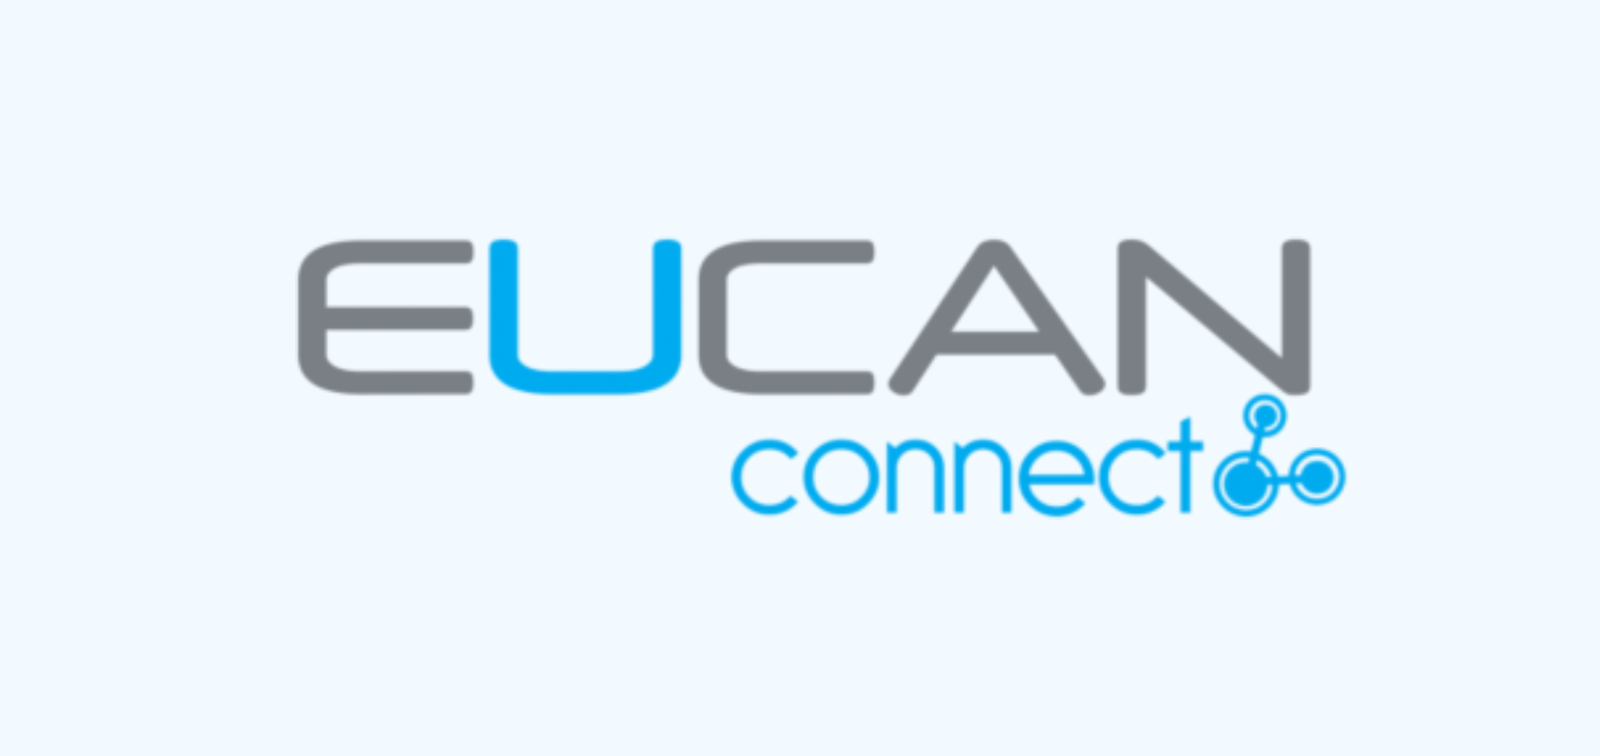 EUCAN-Connect - ISGLOBAL